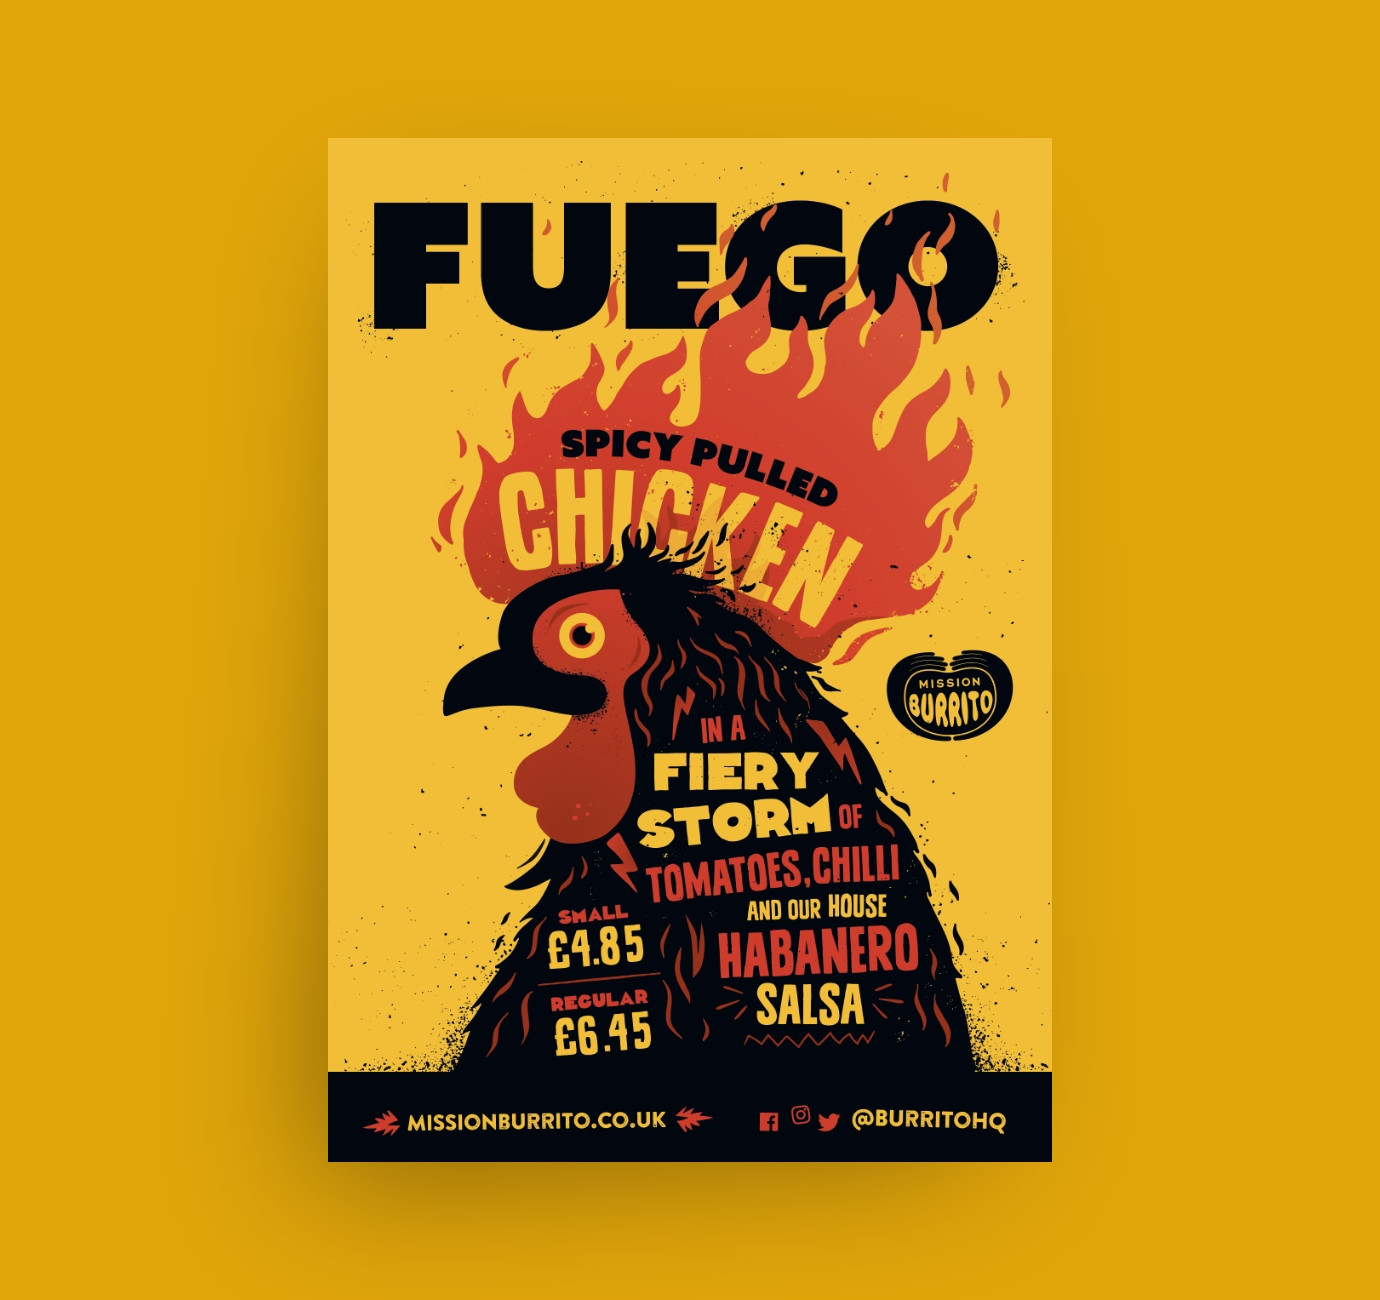 Spicy pulled chicken Fuego poster design by Root Studio